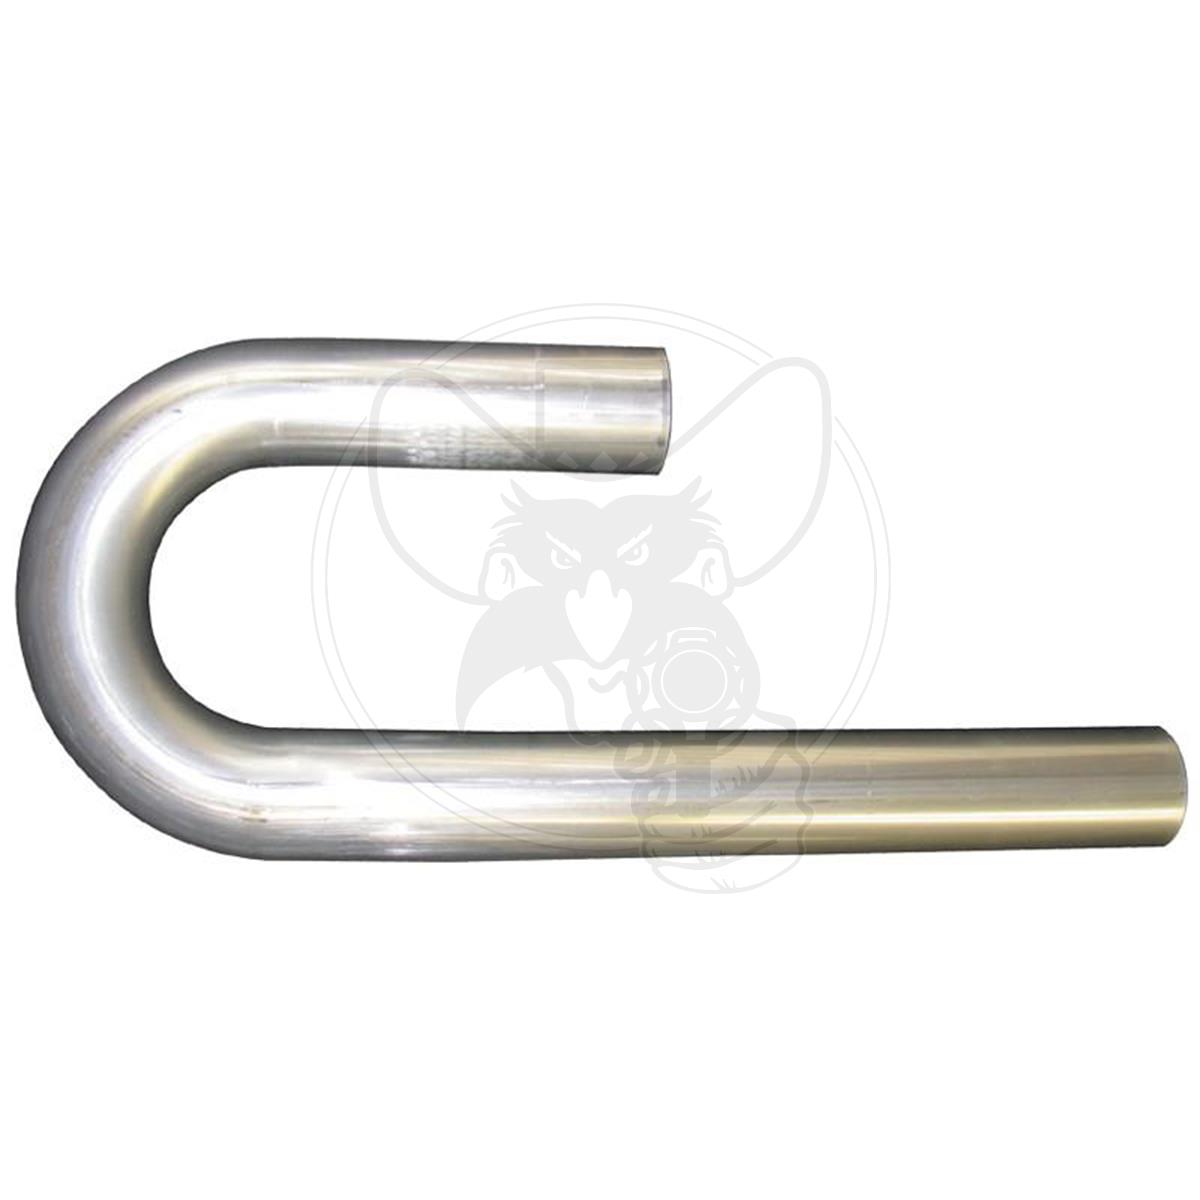 AEROFLOW 180° Stainless J-Bend Tubing 3.0" OD WITH 6" & 12" LEGS